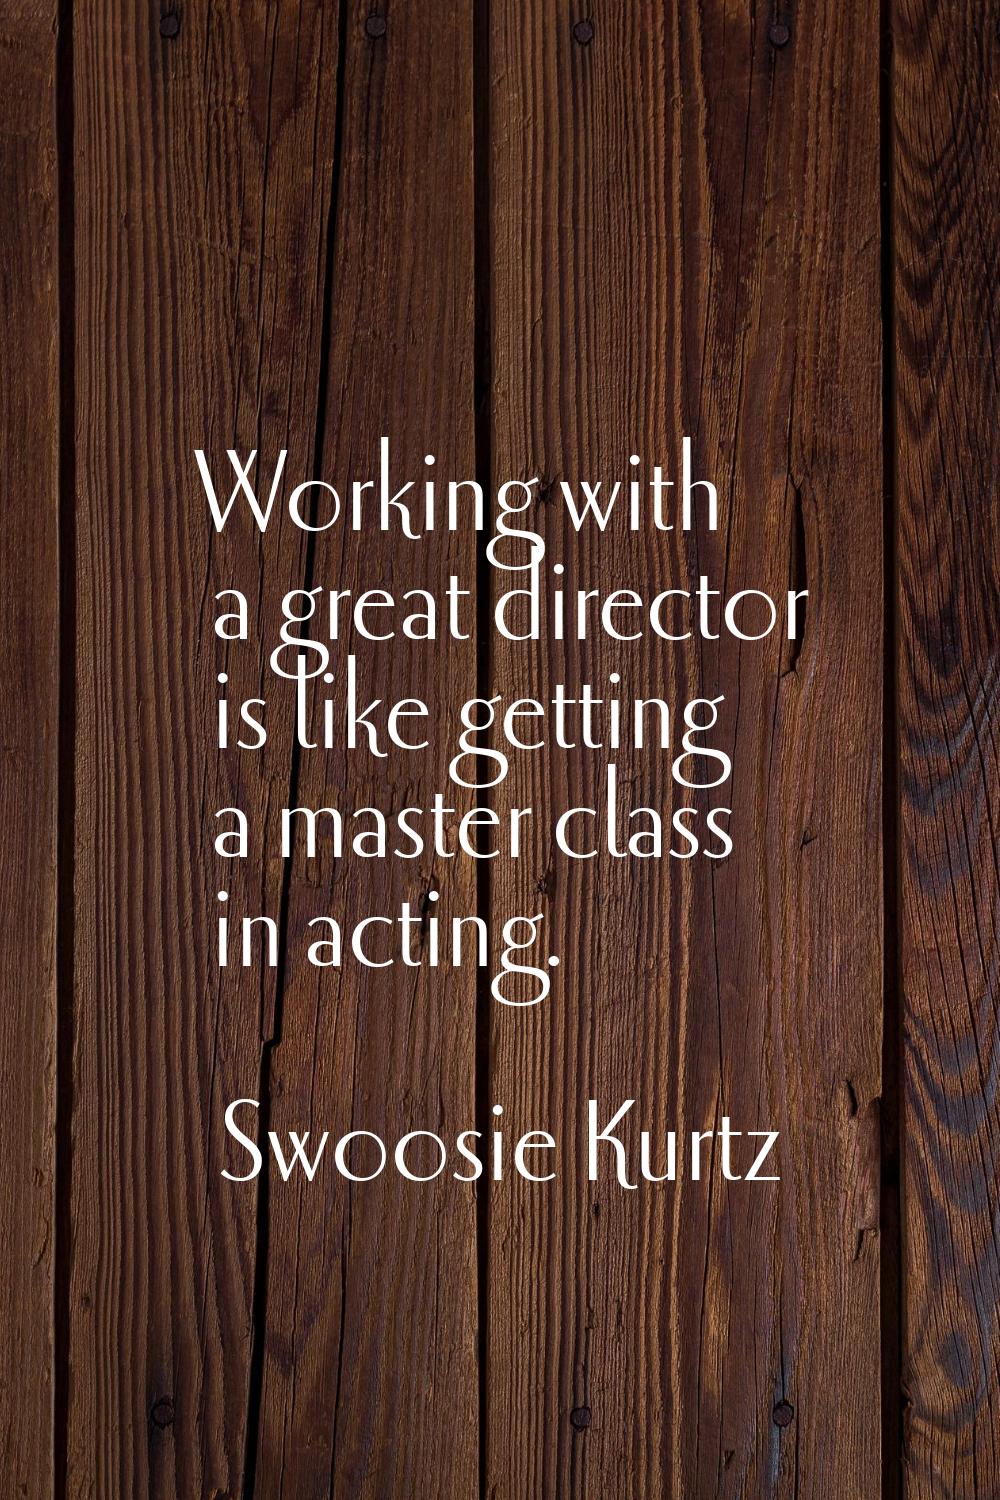 Working with a great director is like getting a master class in acting.